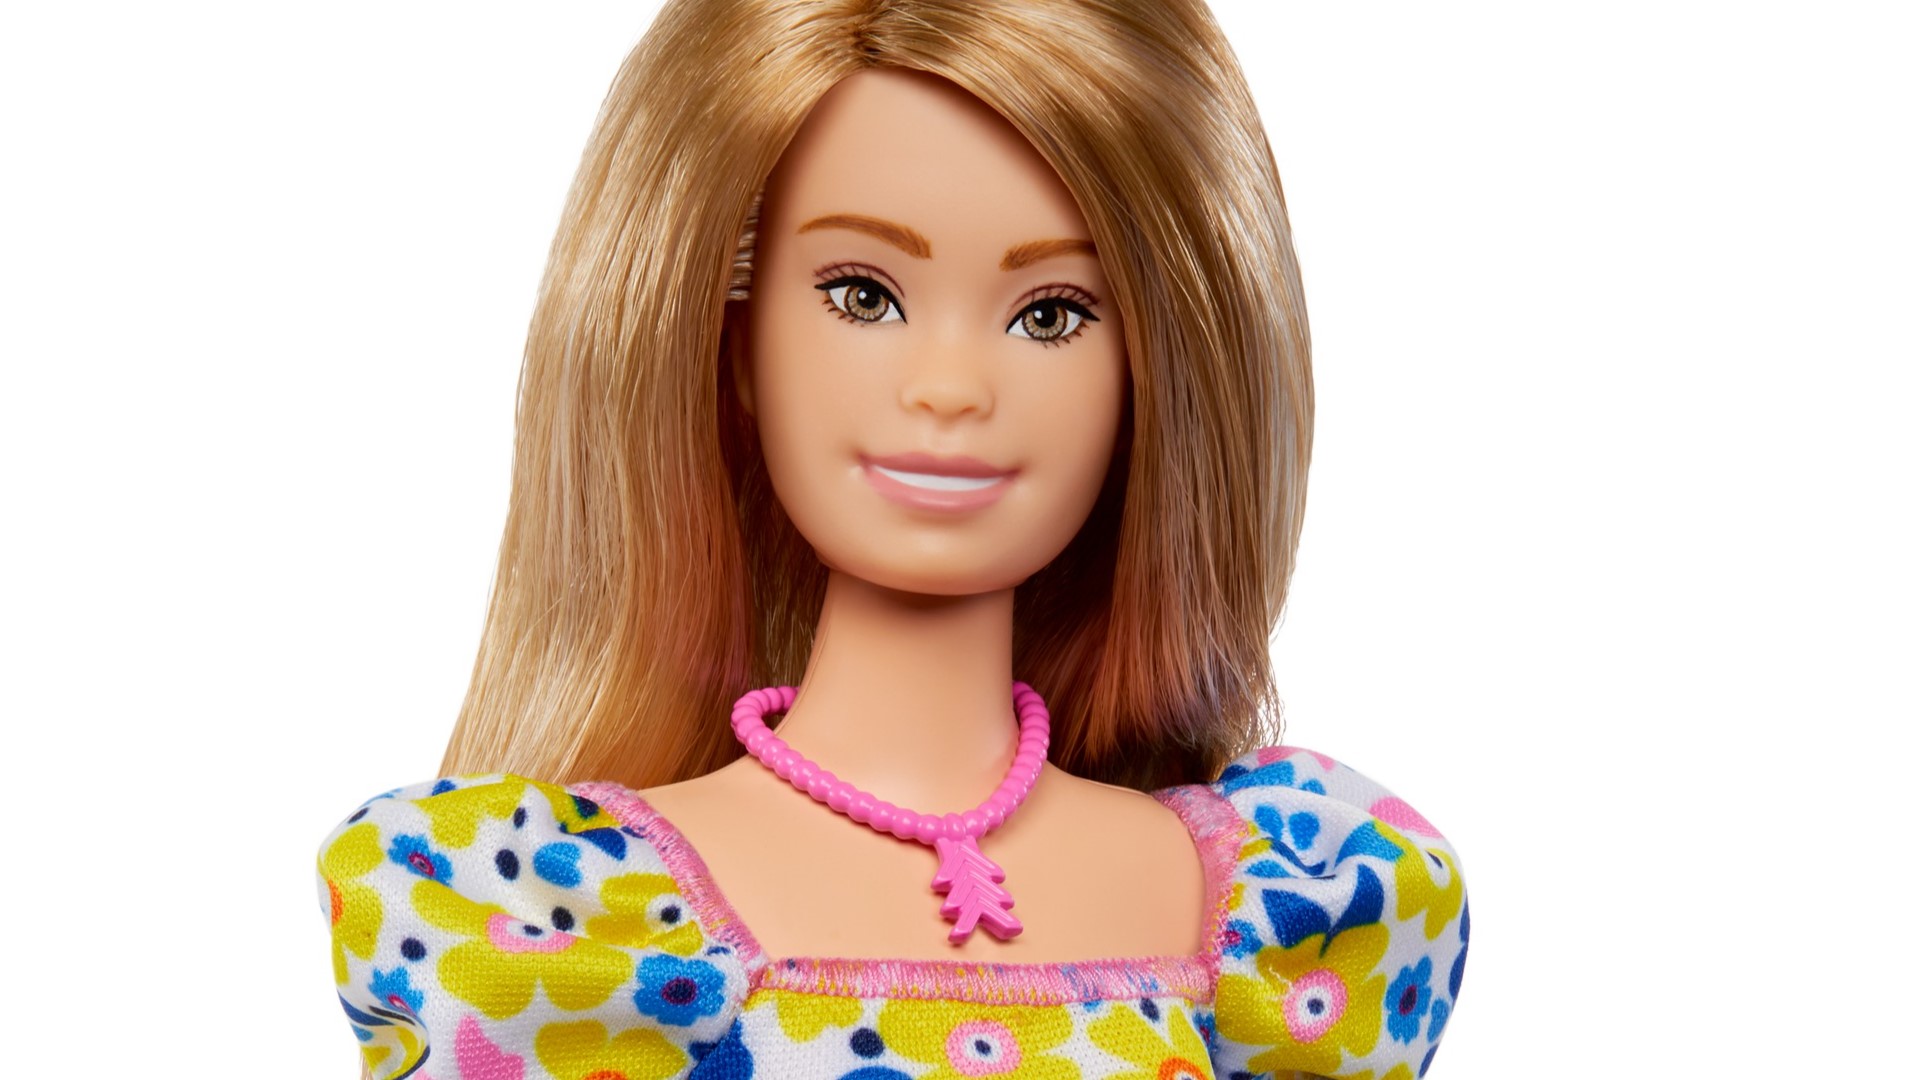 Mattel worked with the National Down Syndrome Society to design a new face, body and outfit for the doll.